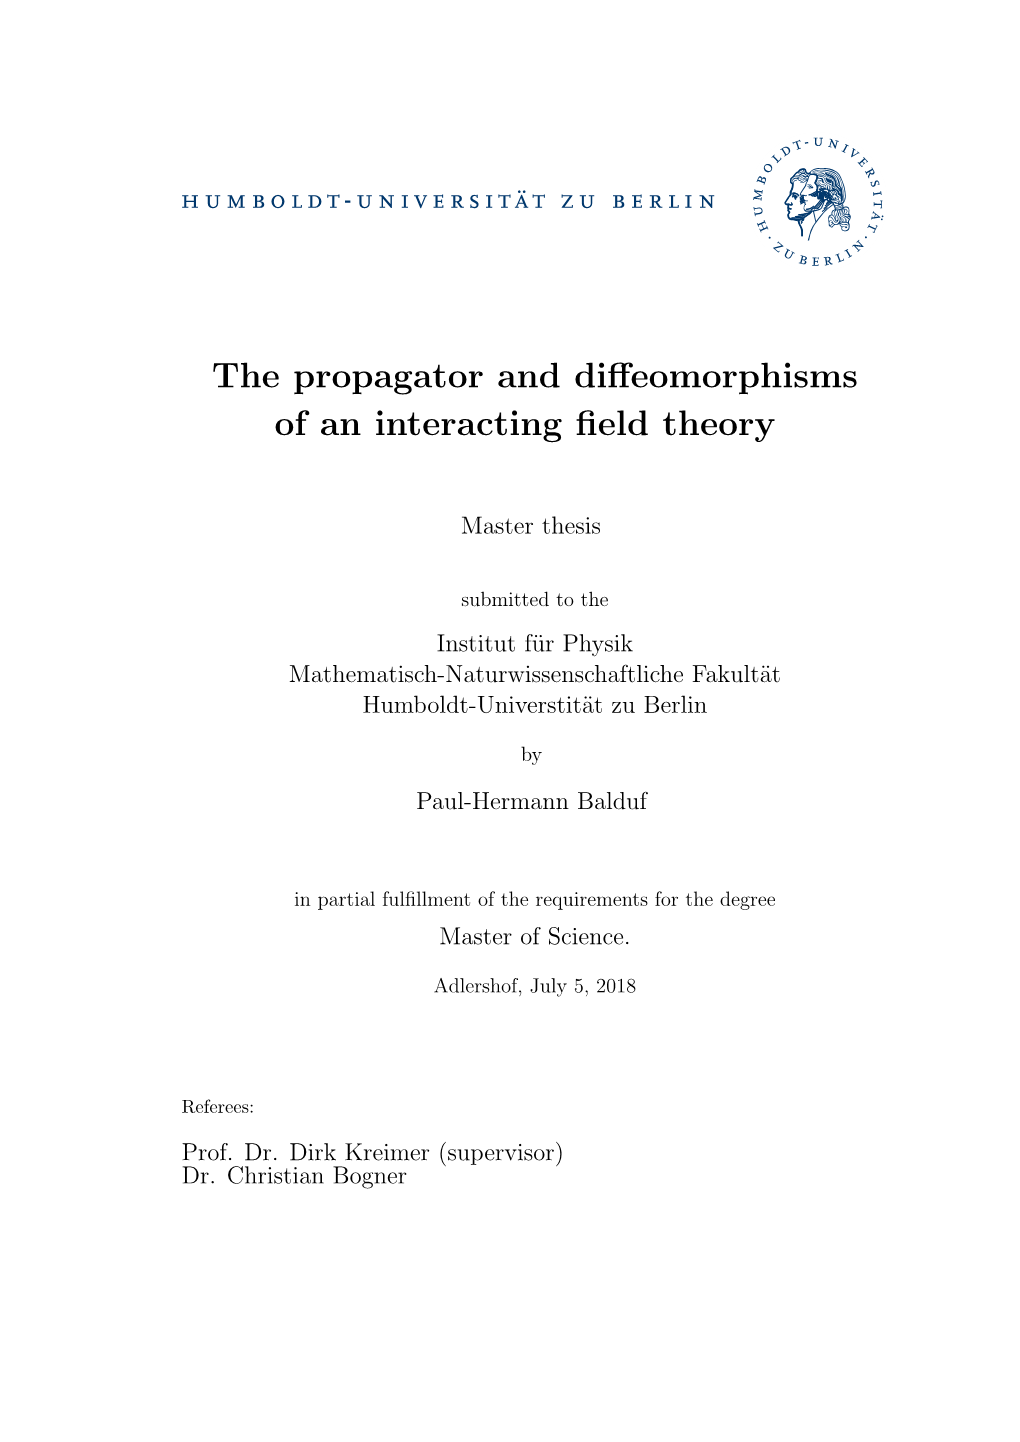 The Propagator and Diffeomorphisms of an Interacting Field Theory